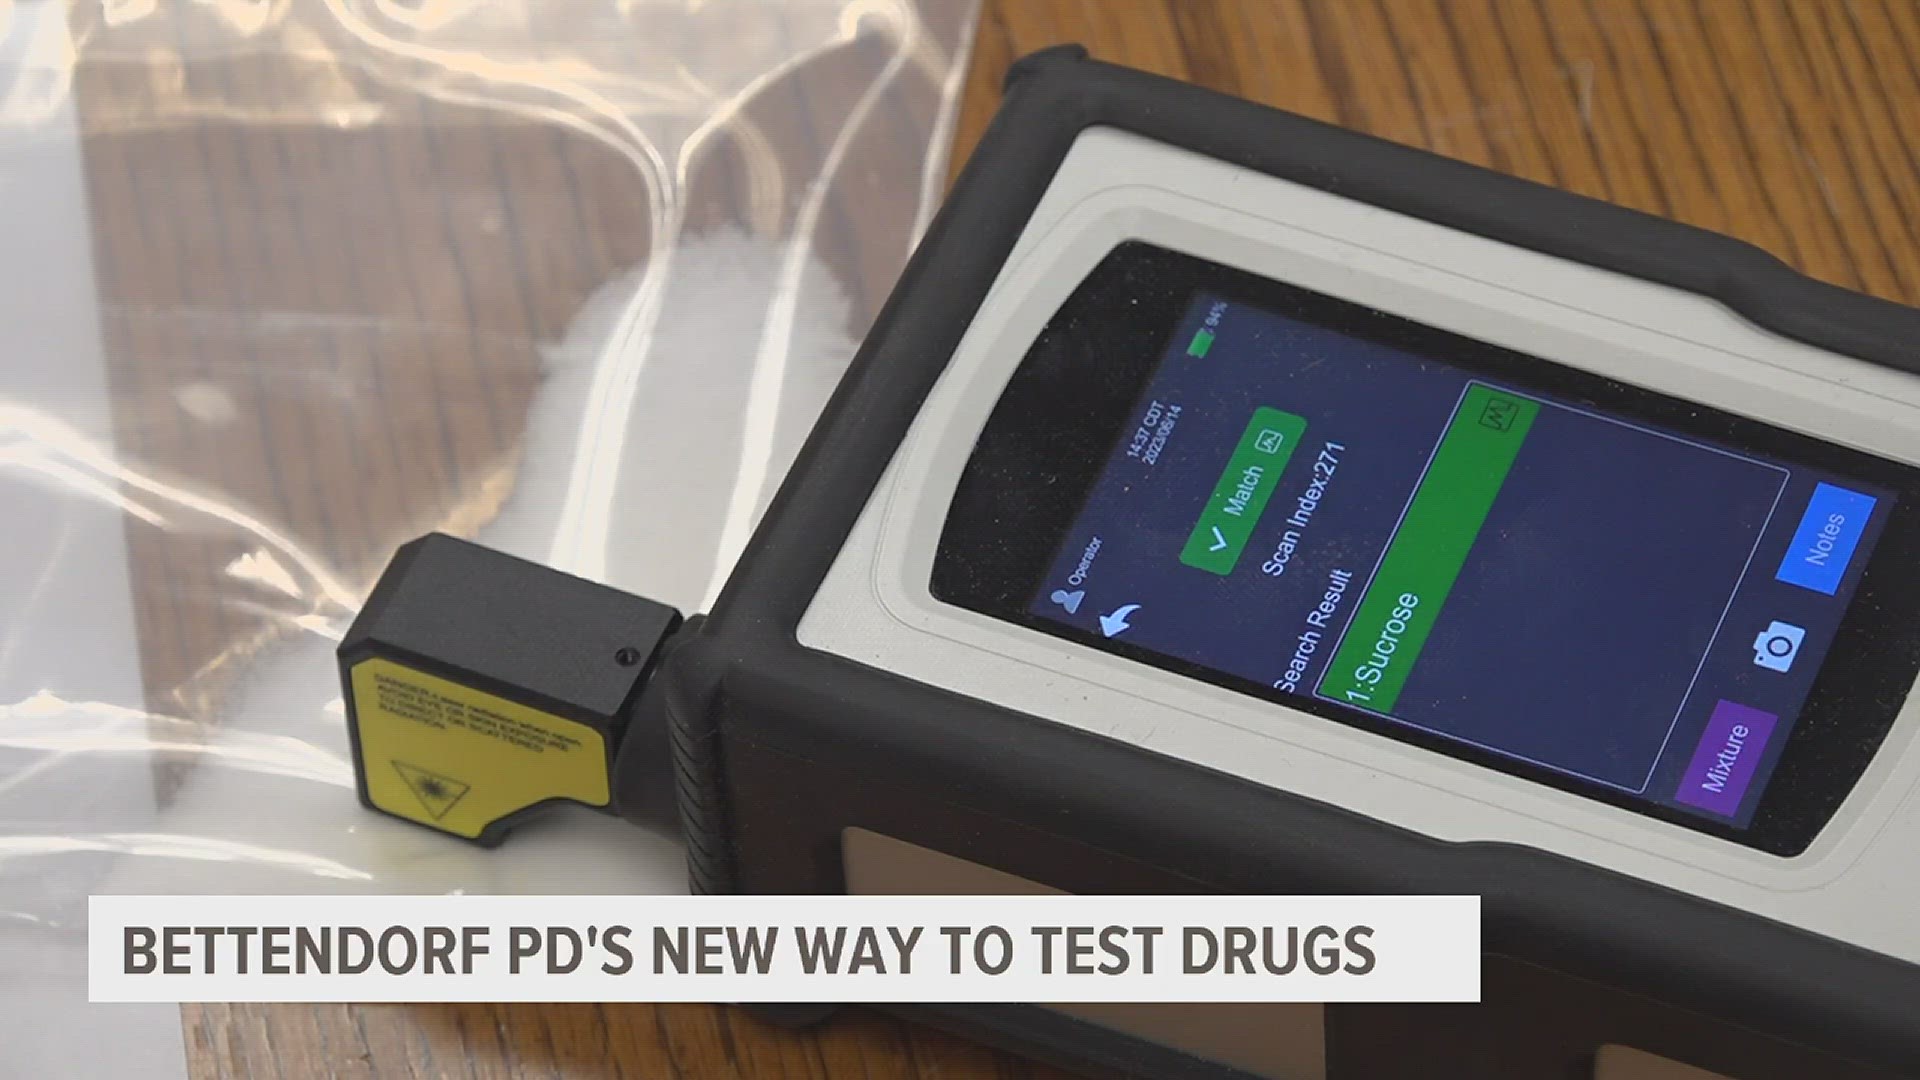 The $30,000 portable scanner can test for thousands of different substances, helping police identify dangerous drugs.